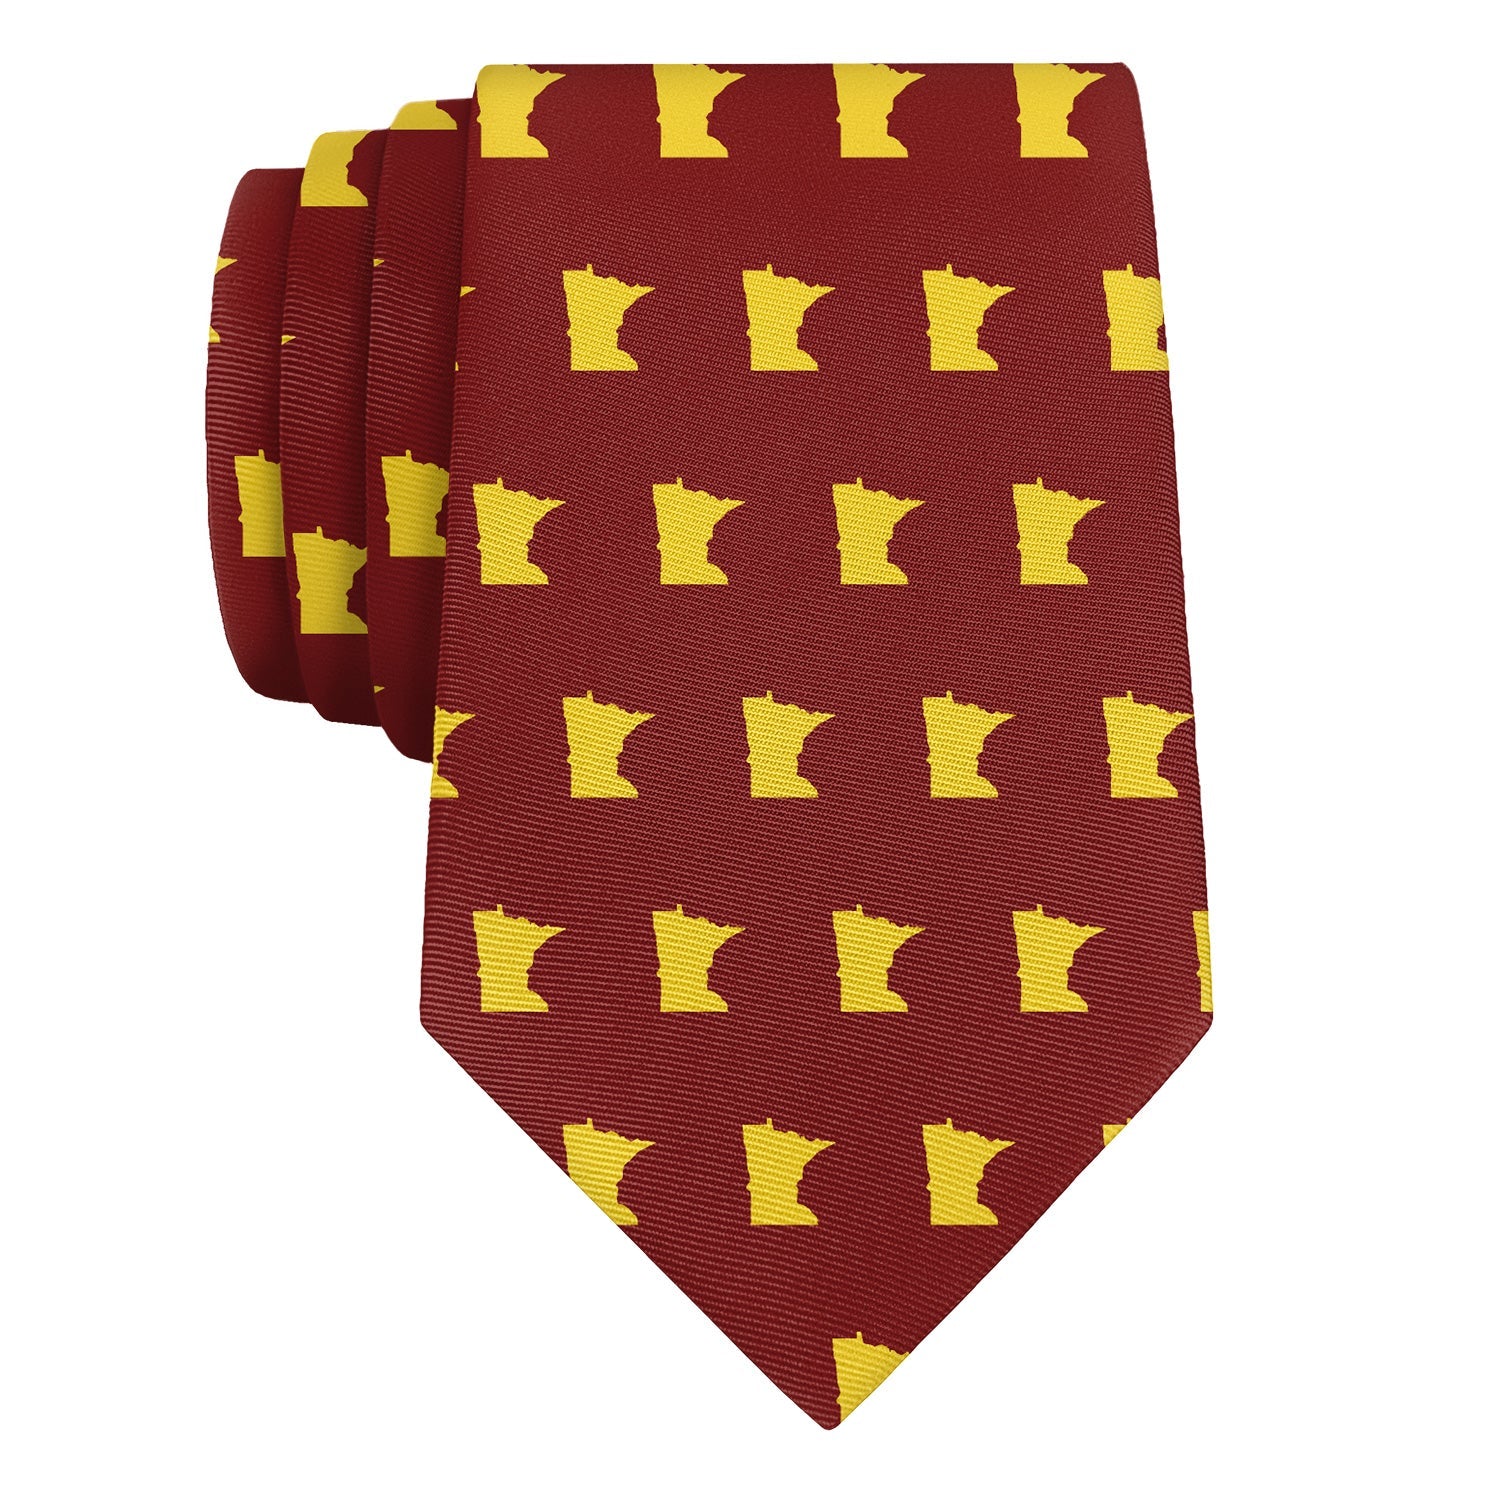 Minnesota State Outline Necktie - Rolled - Knotty Tie Co.